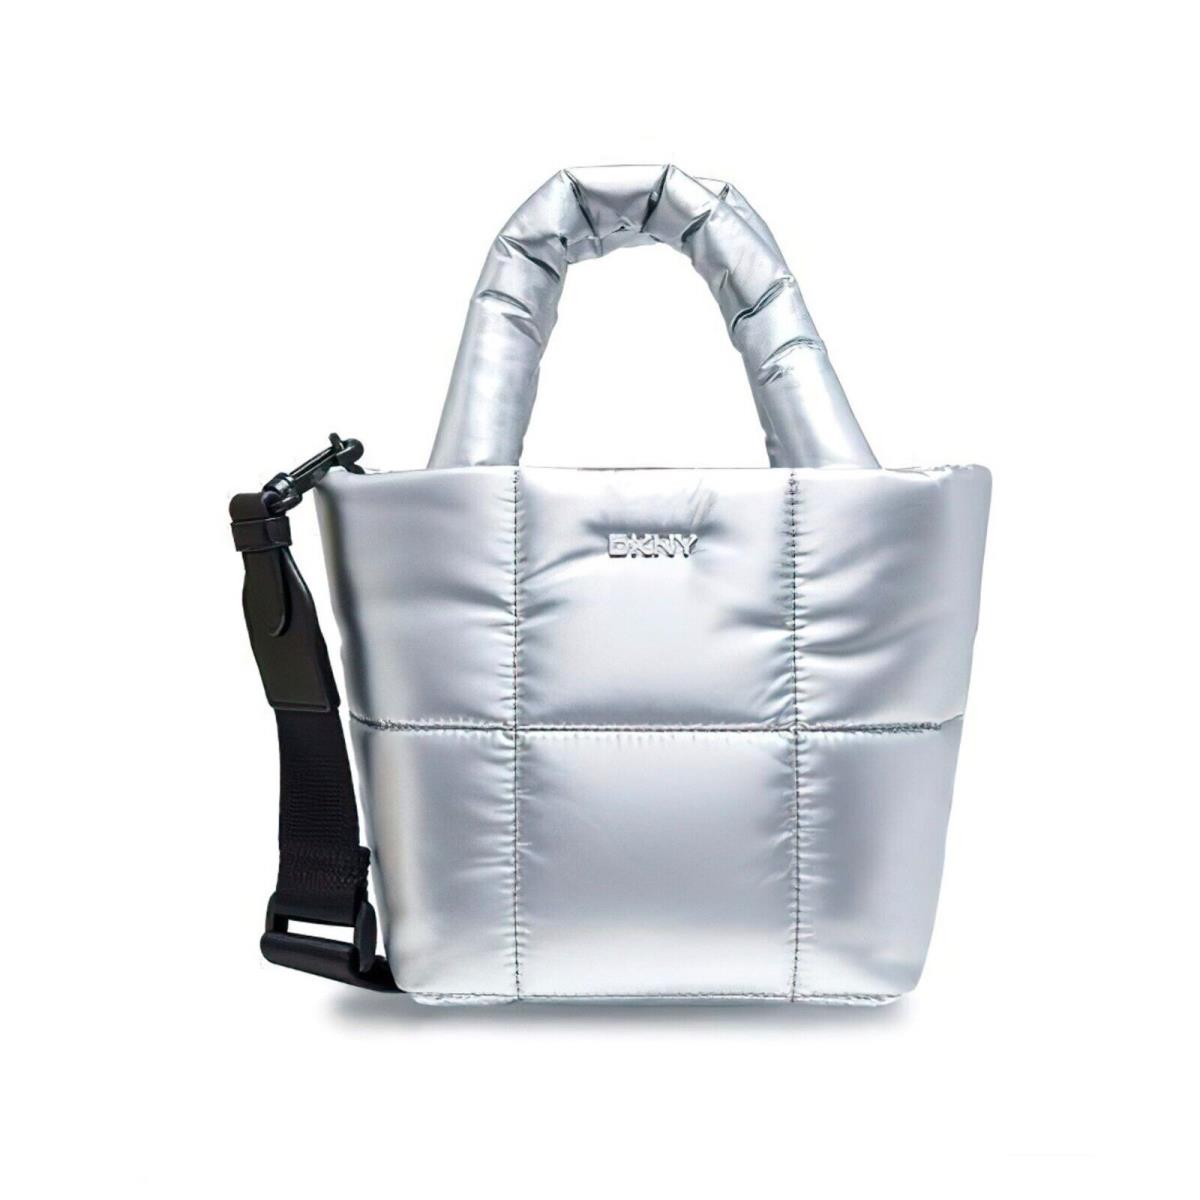 Dkny Women`s Giania Small Shoulder Tote Bag Silver